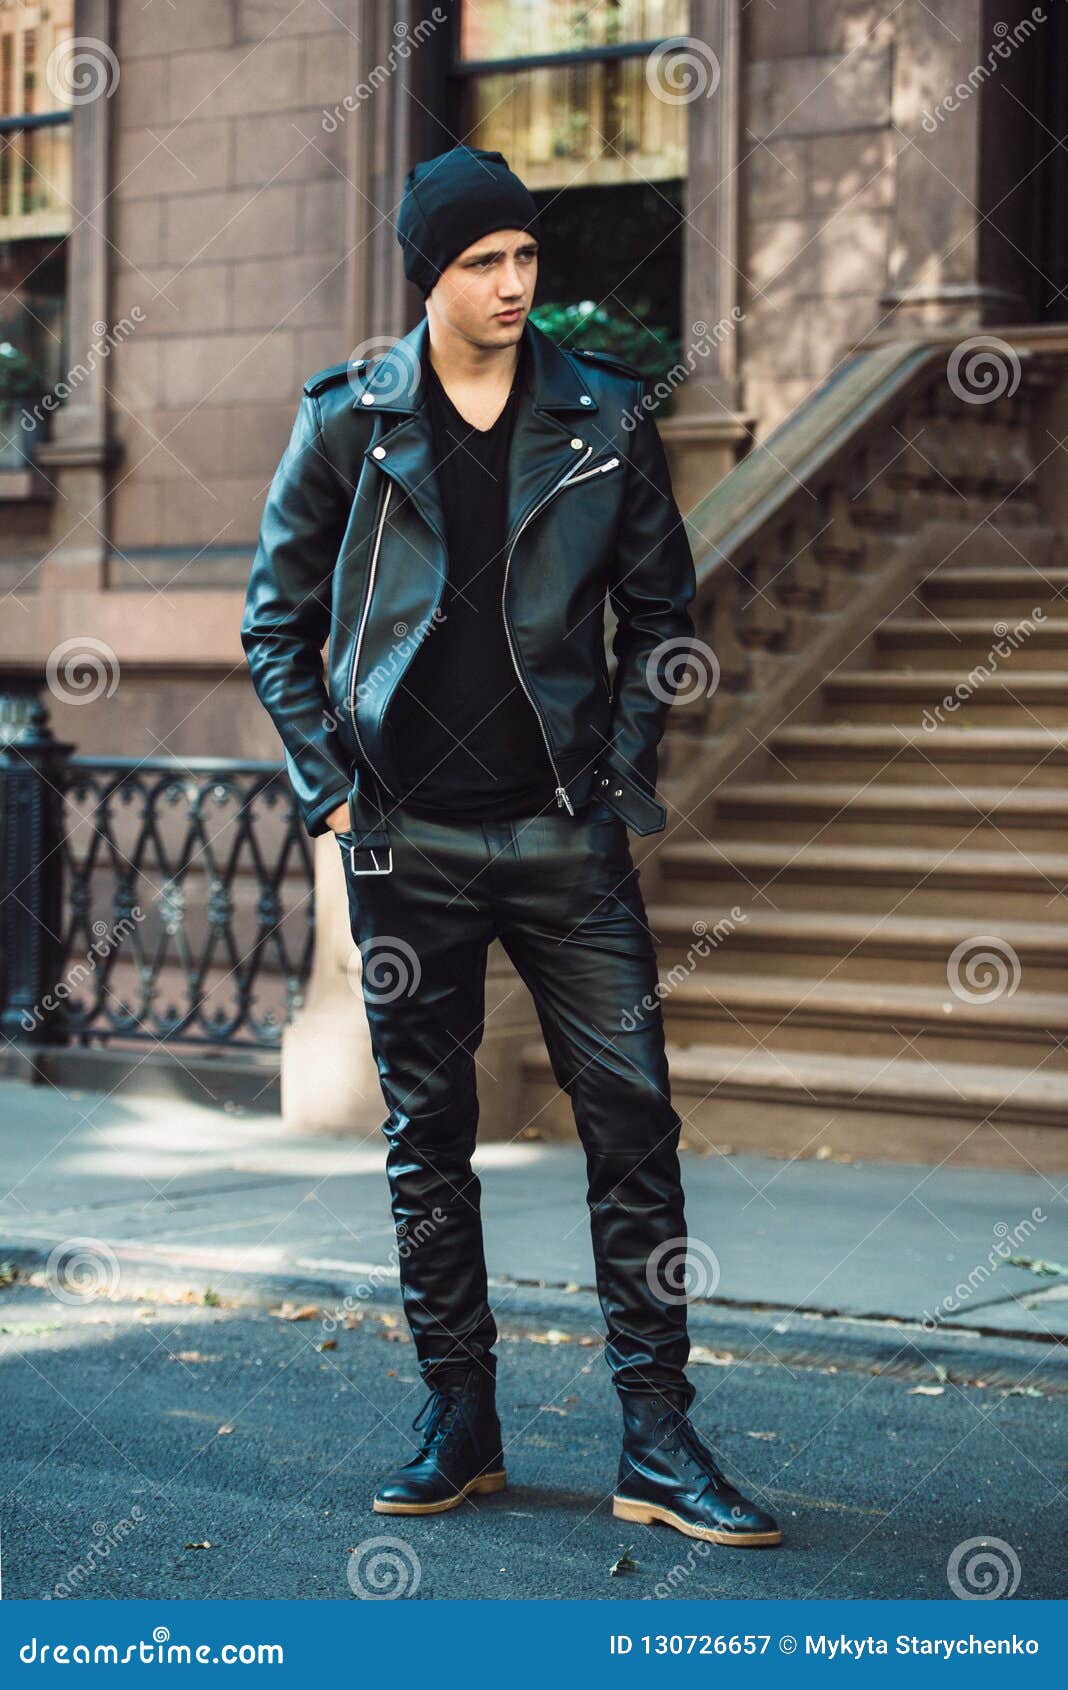 https://thumbs.dreamstime.com/z/hipster-man-wearing-black-style-leather-outfit-hat-pants-jacket-shoes-standing-city-street-130726657.jpg